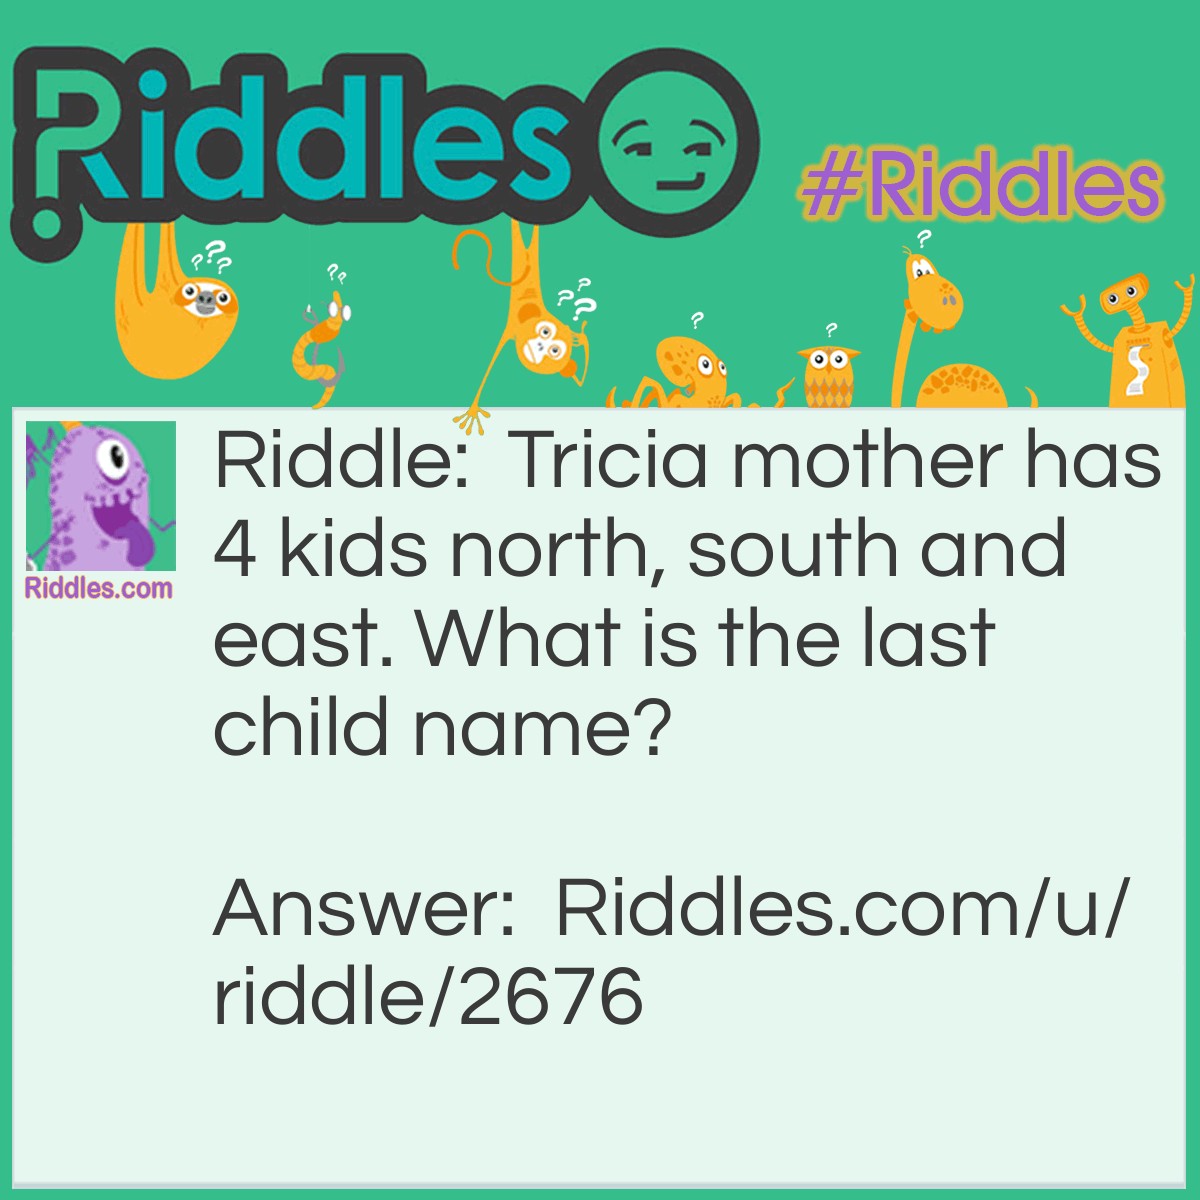 Riddle: Tricia mother has 4 kids north, south and east. What is the last child name? Answer: Tricia.